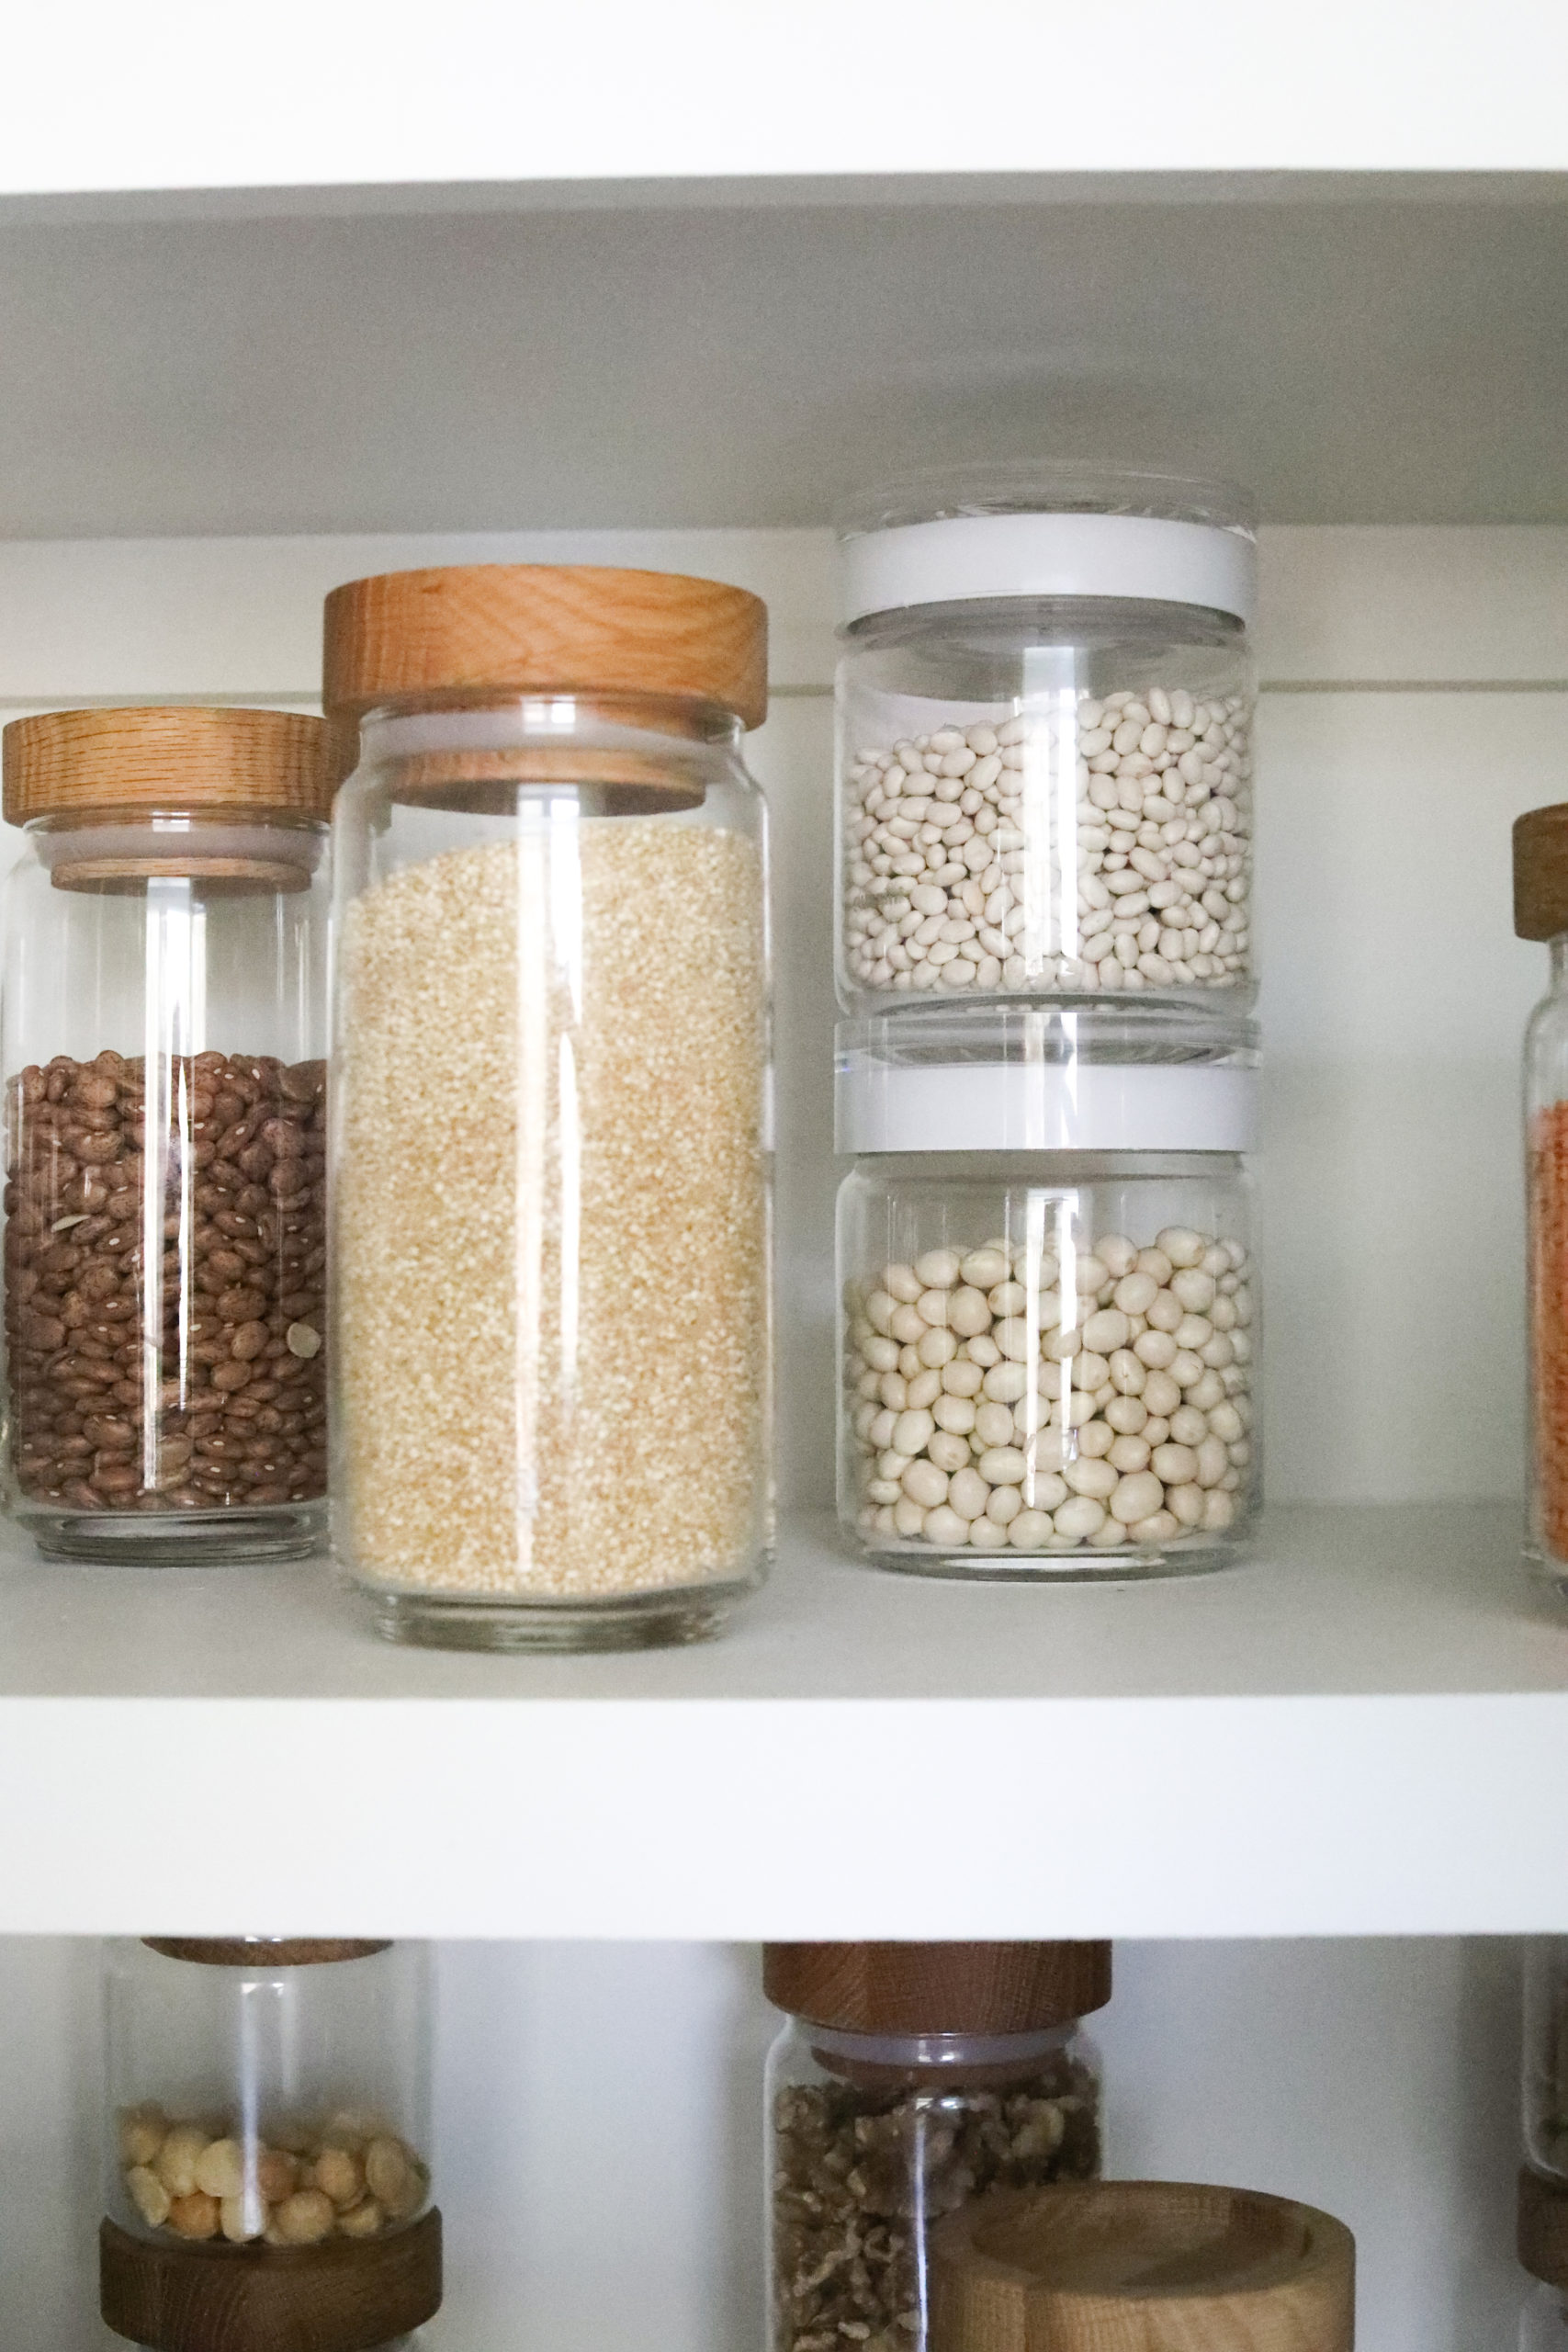 How To Stock Your Pantry For Balanced Eating | Nutrition Stripped